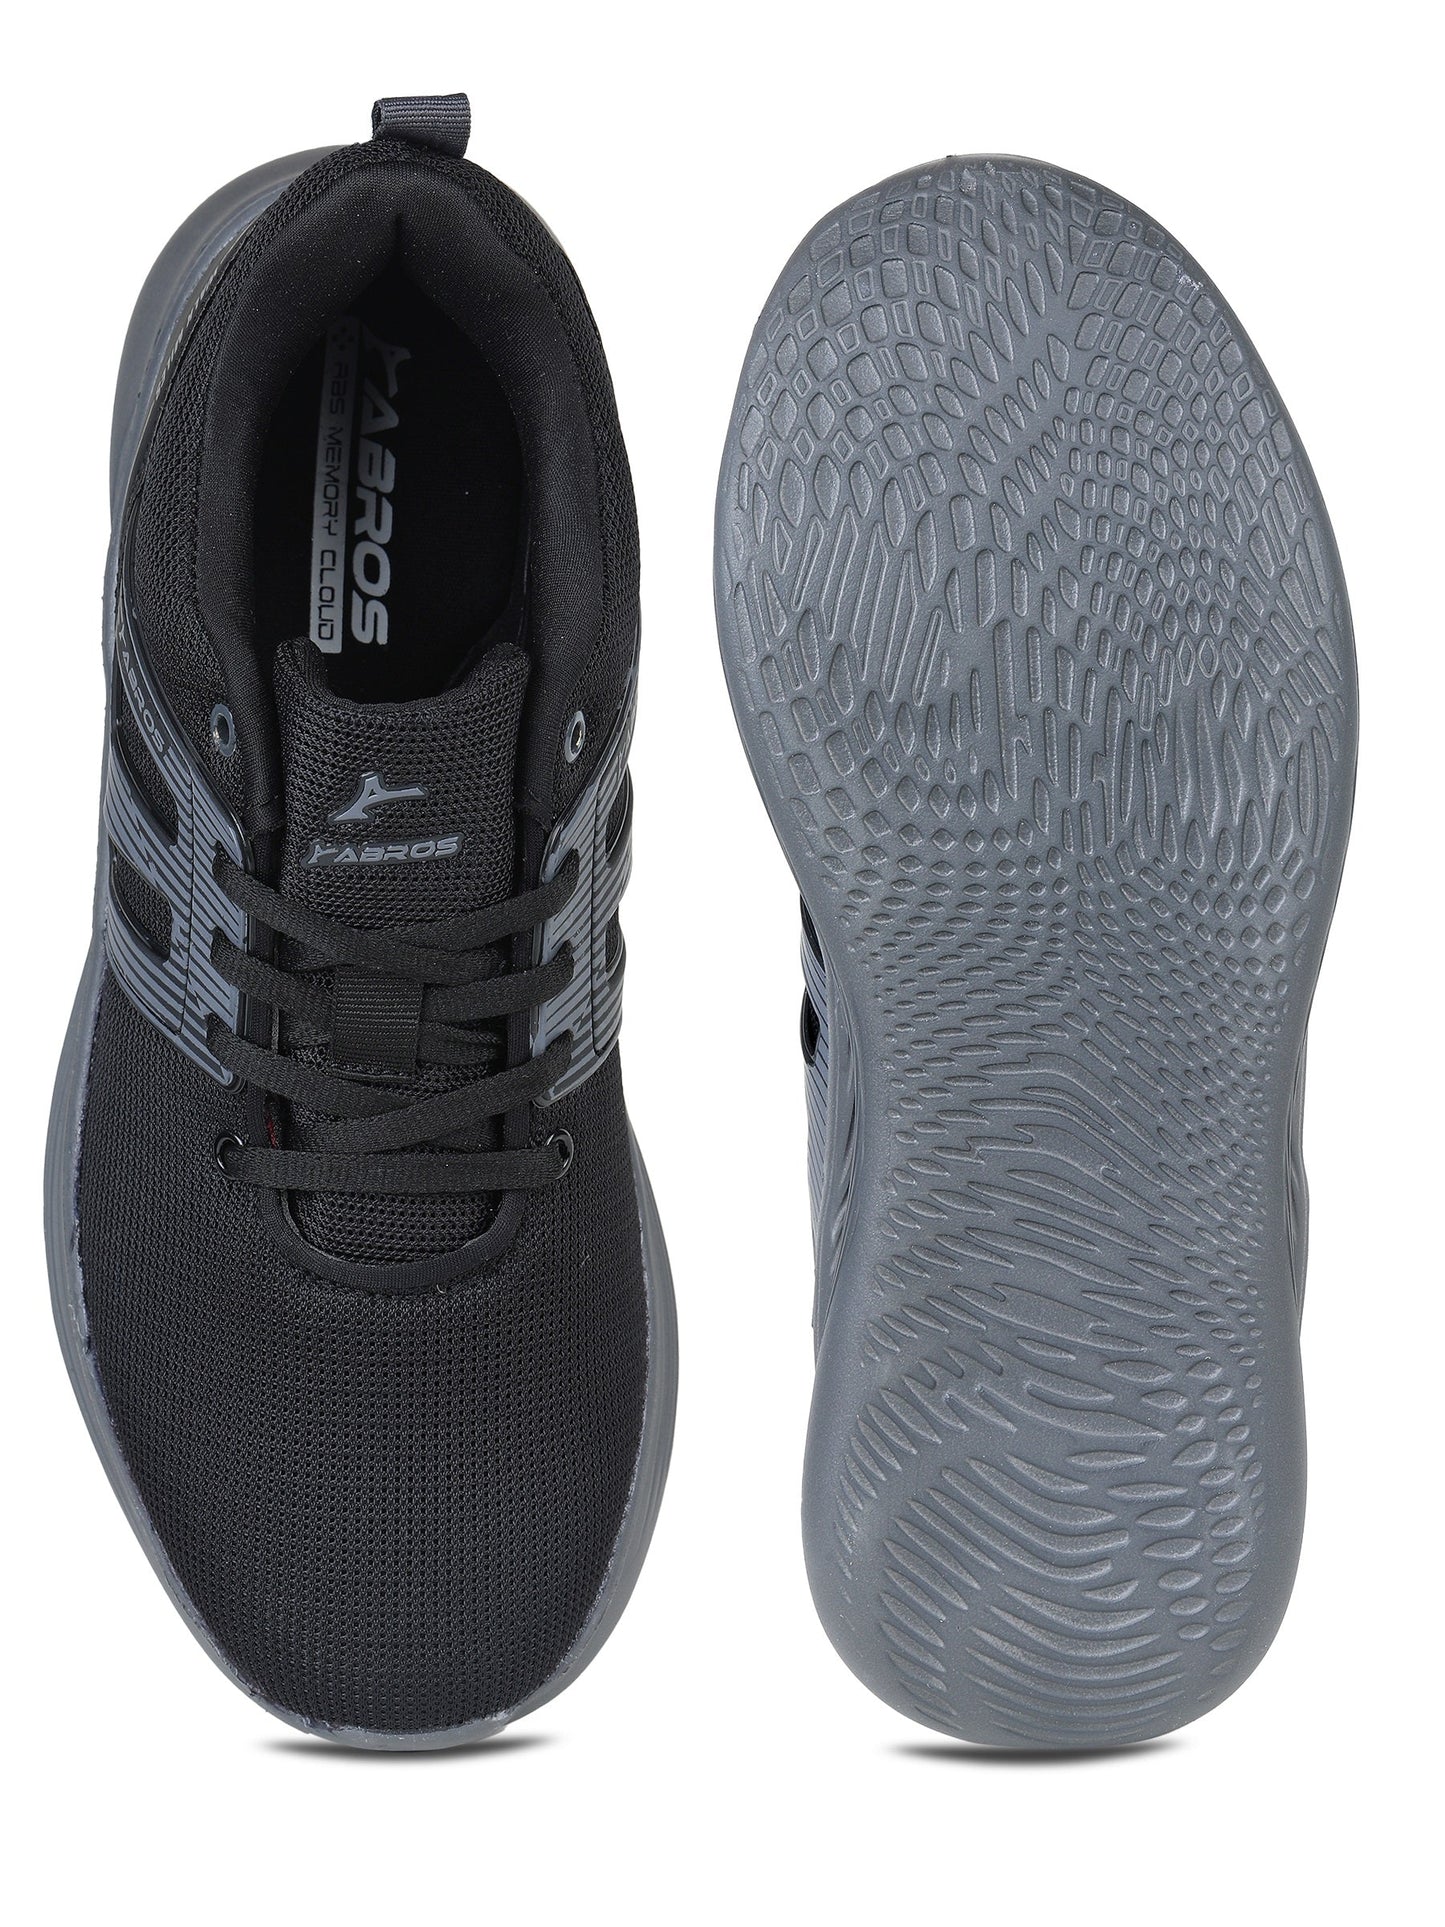 ABROS  LINUX RUNNING SPORTS SHOES FOR MEN